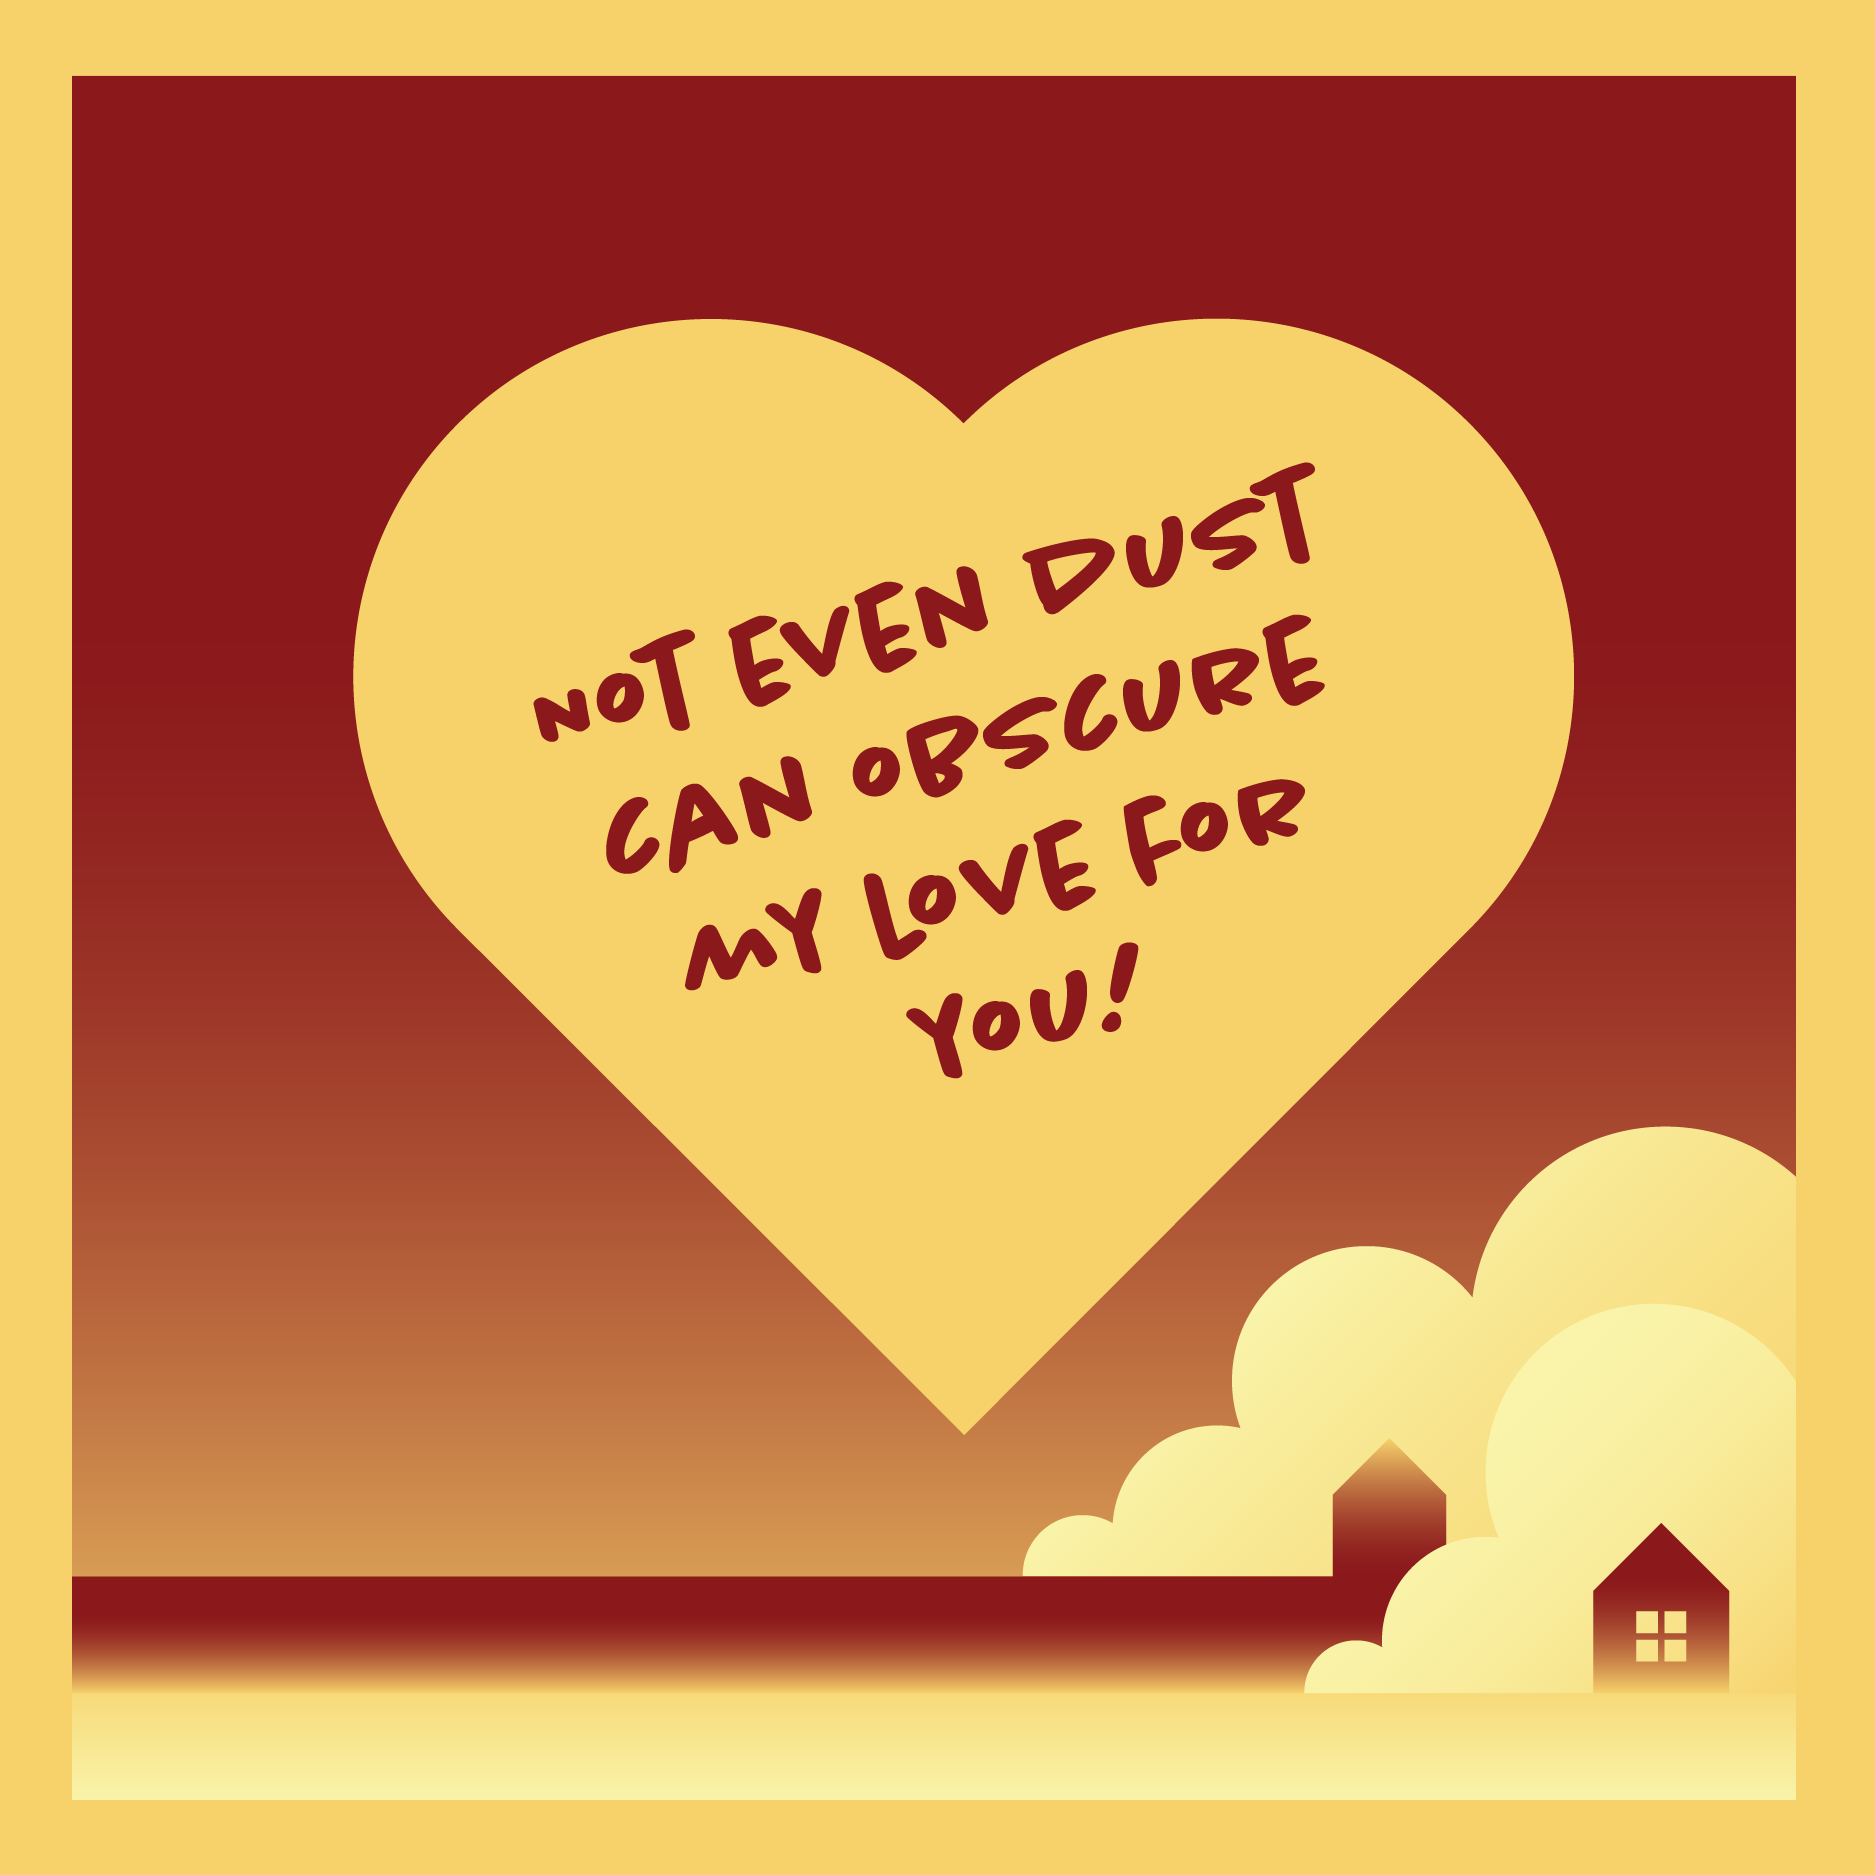 "Not even dust can obscure my love for you!" with an image of houses in a dust storm.